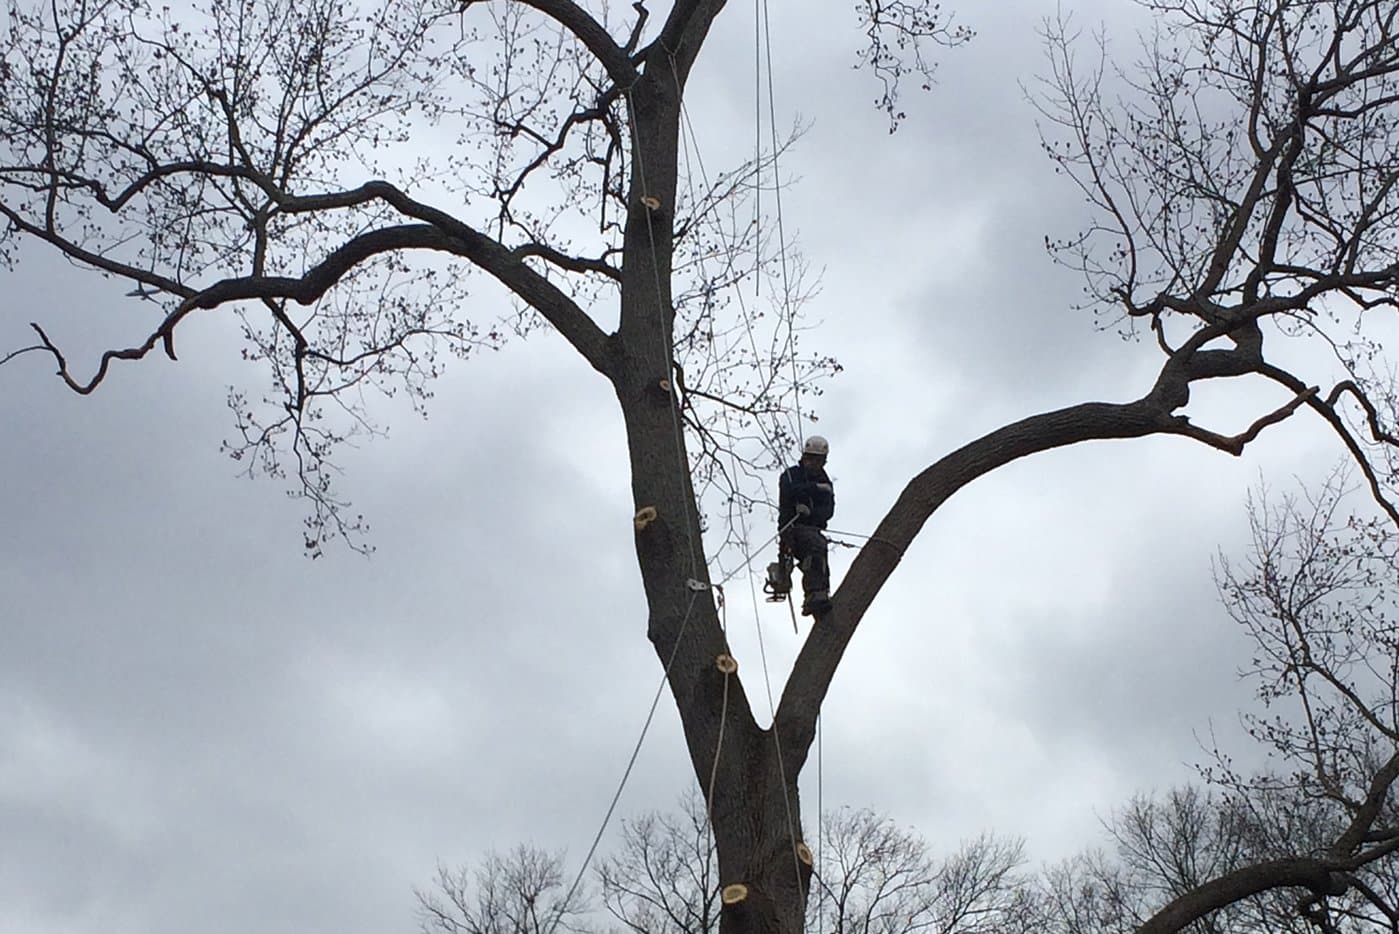 Tree Trimming Service in Northern Virginia ProArbor | ProArbor Tree Removal & Tree Maintenance